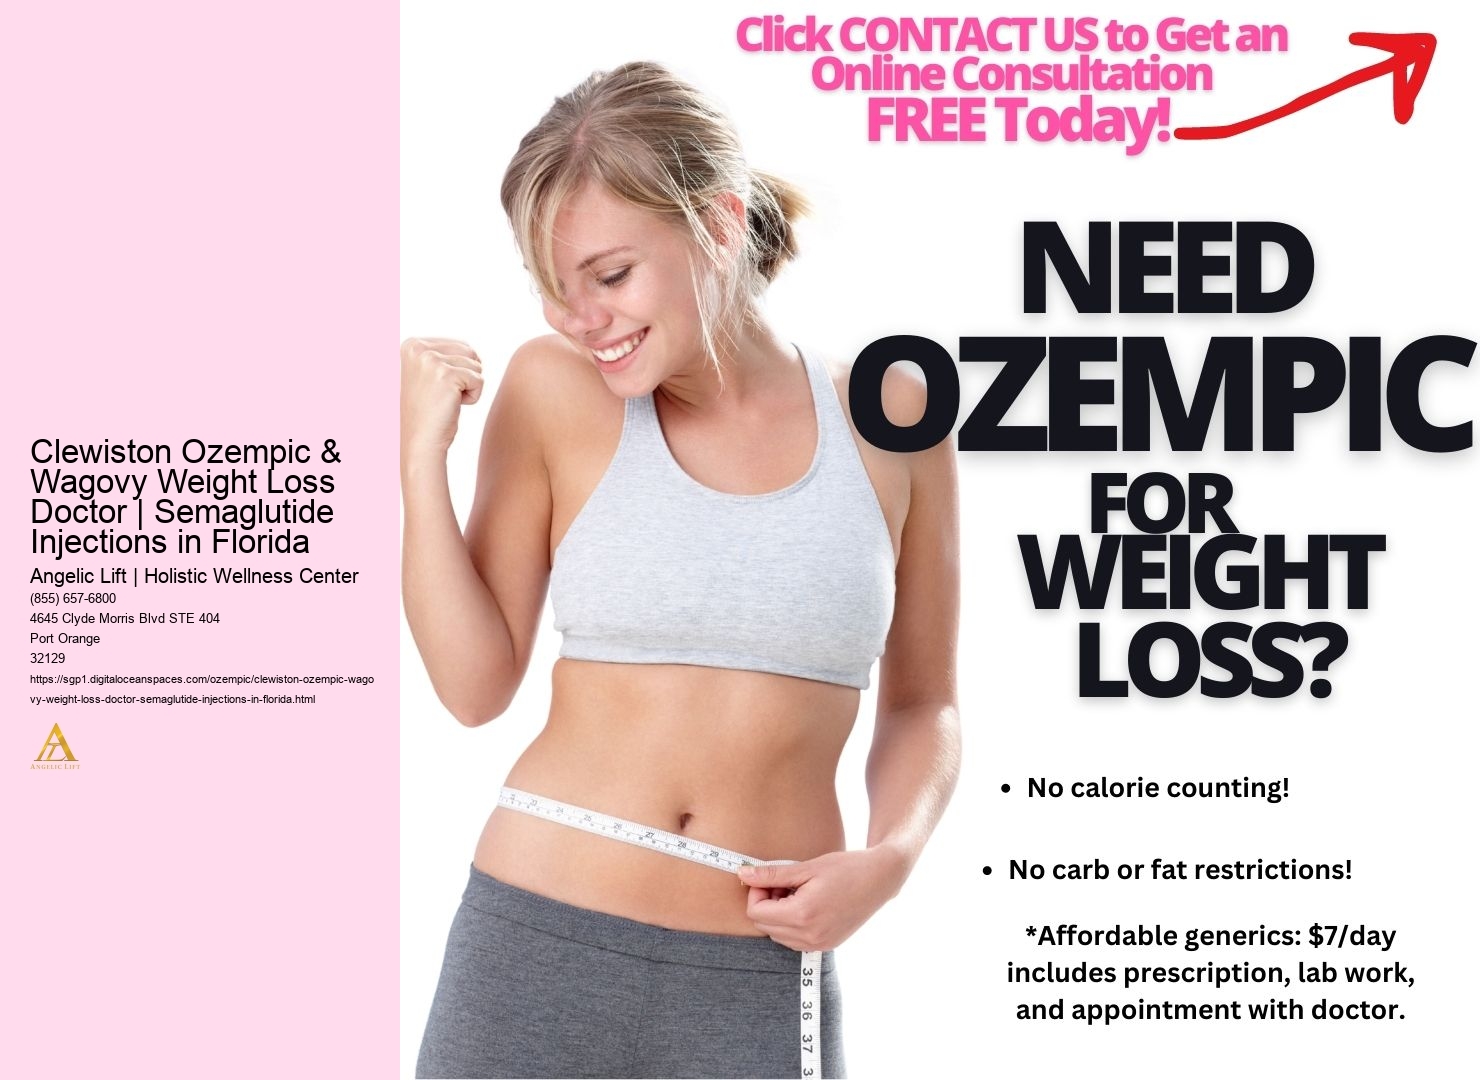 Clewiston Ozempic & Wagovy Weight Loss Doctor | Semaglutide Injections in Florida